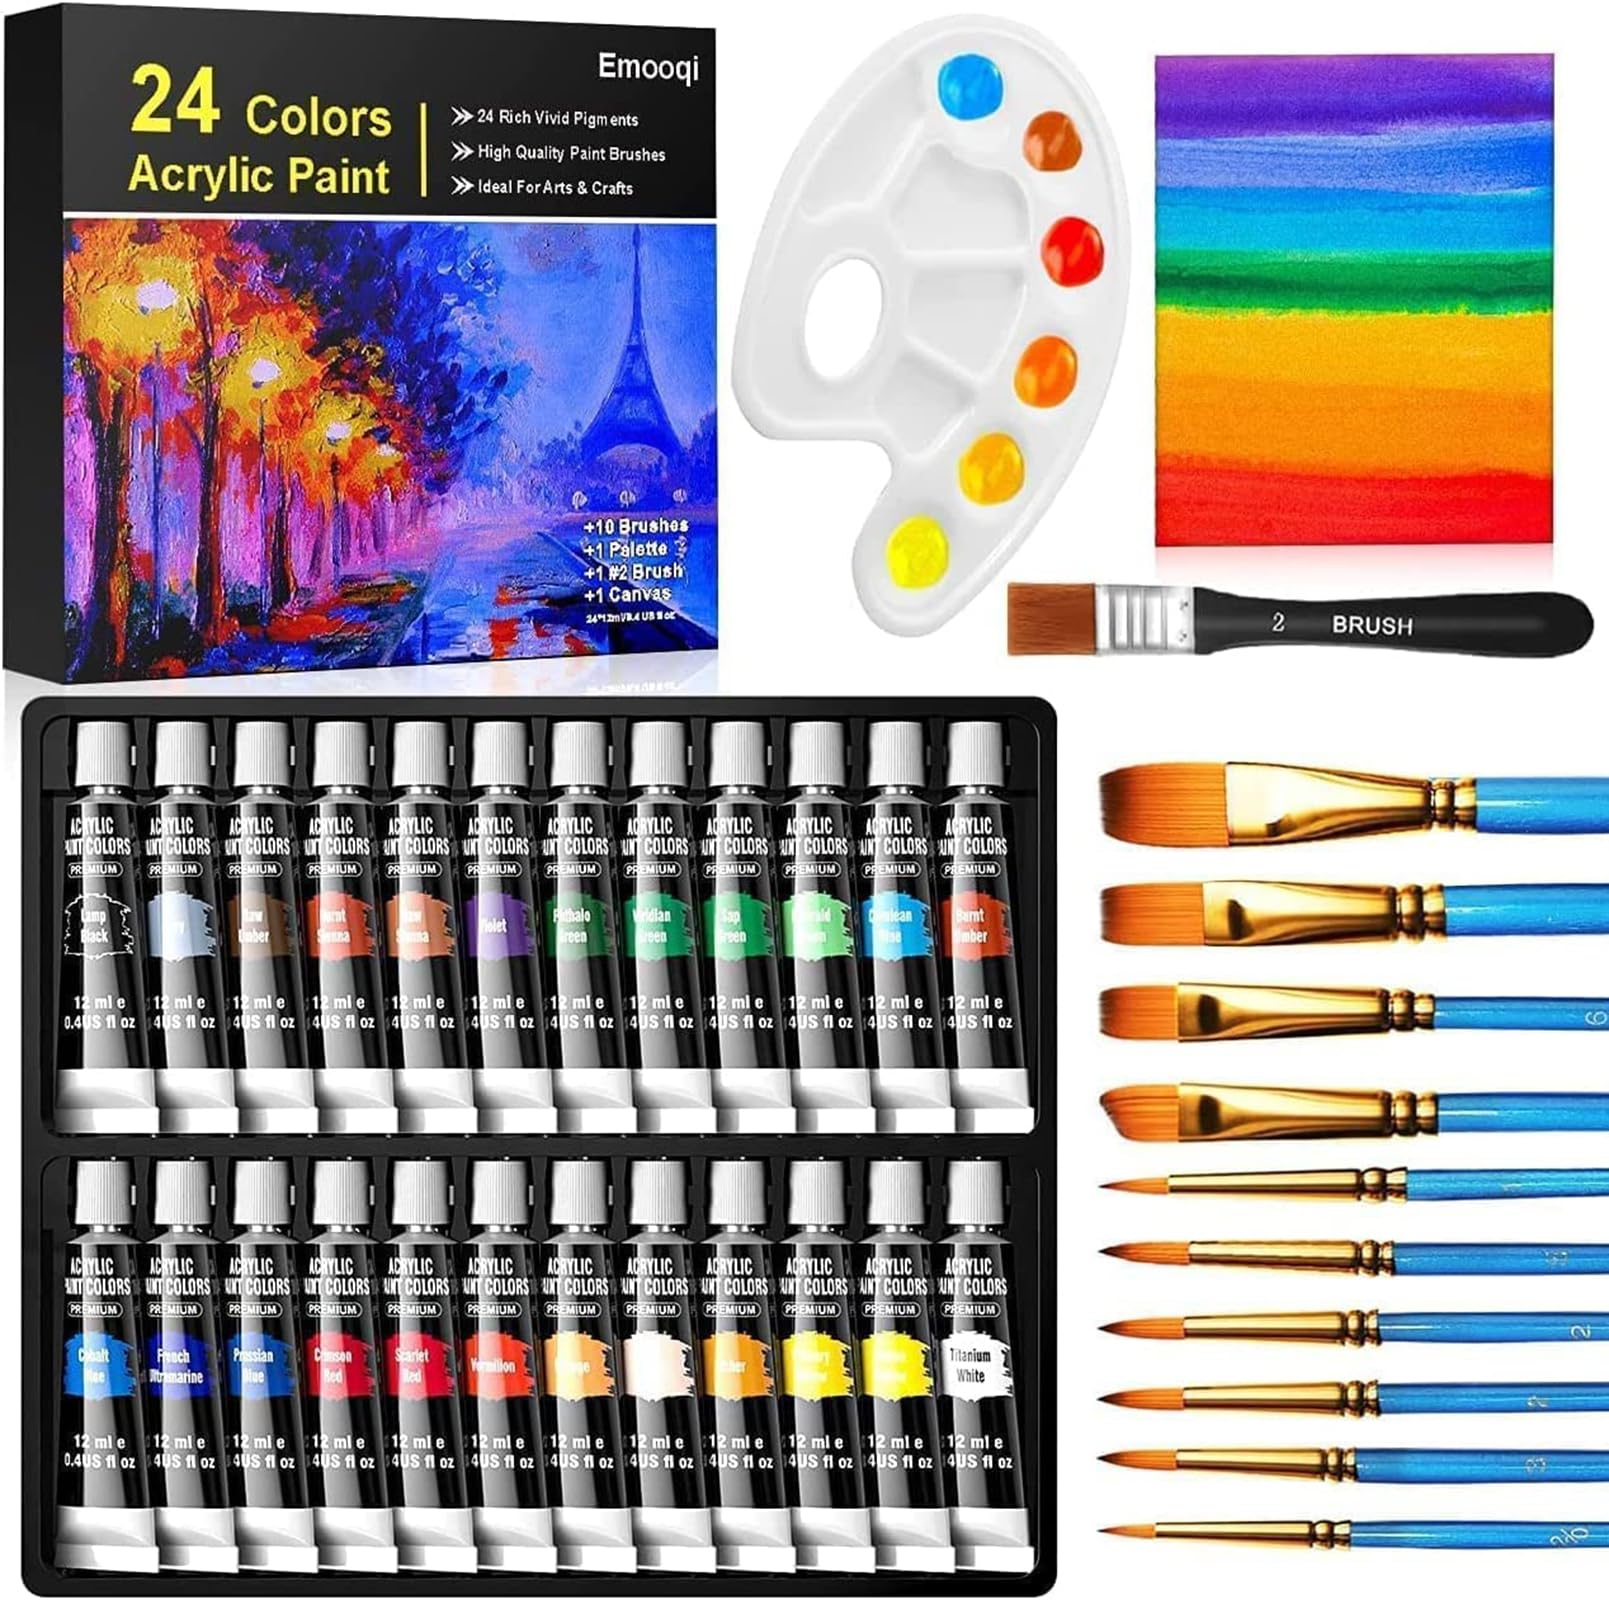 Emooqi Acrylic Paint Set 24 Rich Paint Colors with 11 Art Brushes Paint  Palette & Painting Canvas - Quick Dry Paints for Hobby Painters & Kids  Great for Canvas Wood Rock Ceramic Painting.